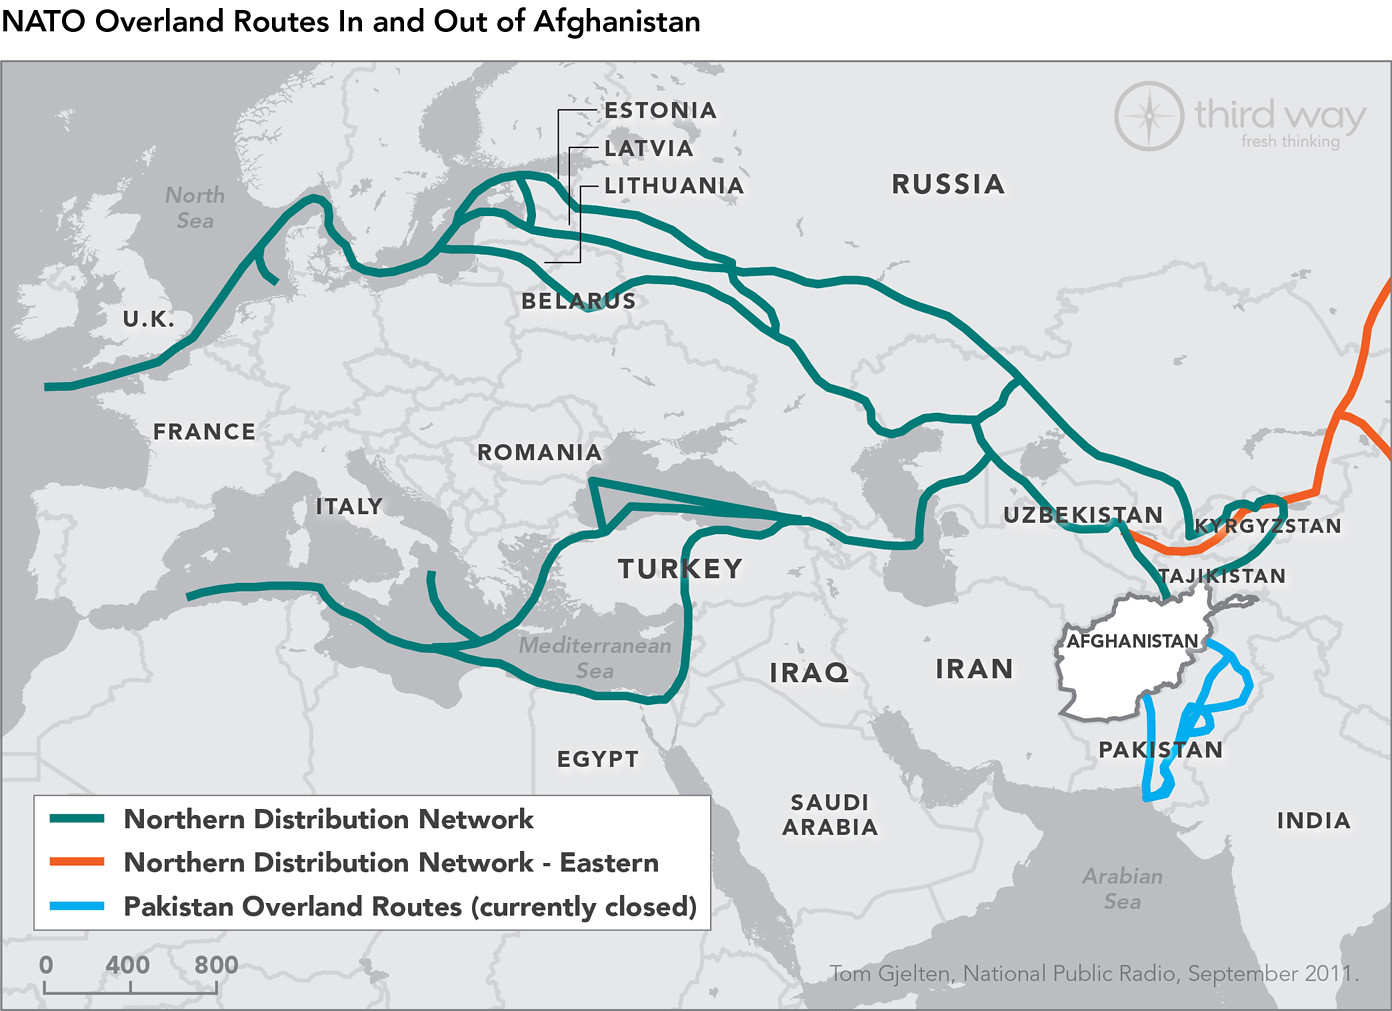 Map of Europe, northern Africa, and southwest and south Asia, showing NATO’s logistical supply routes, including the Northern Distribution Networks through Russia, during the U.S.-led invasion of Afghanistan, circa 2012.